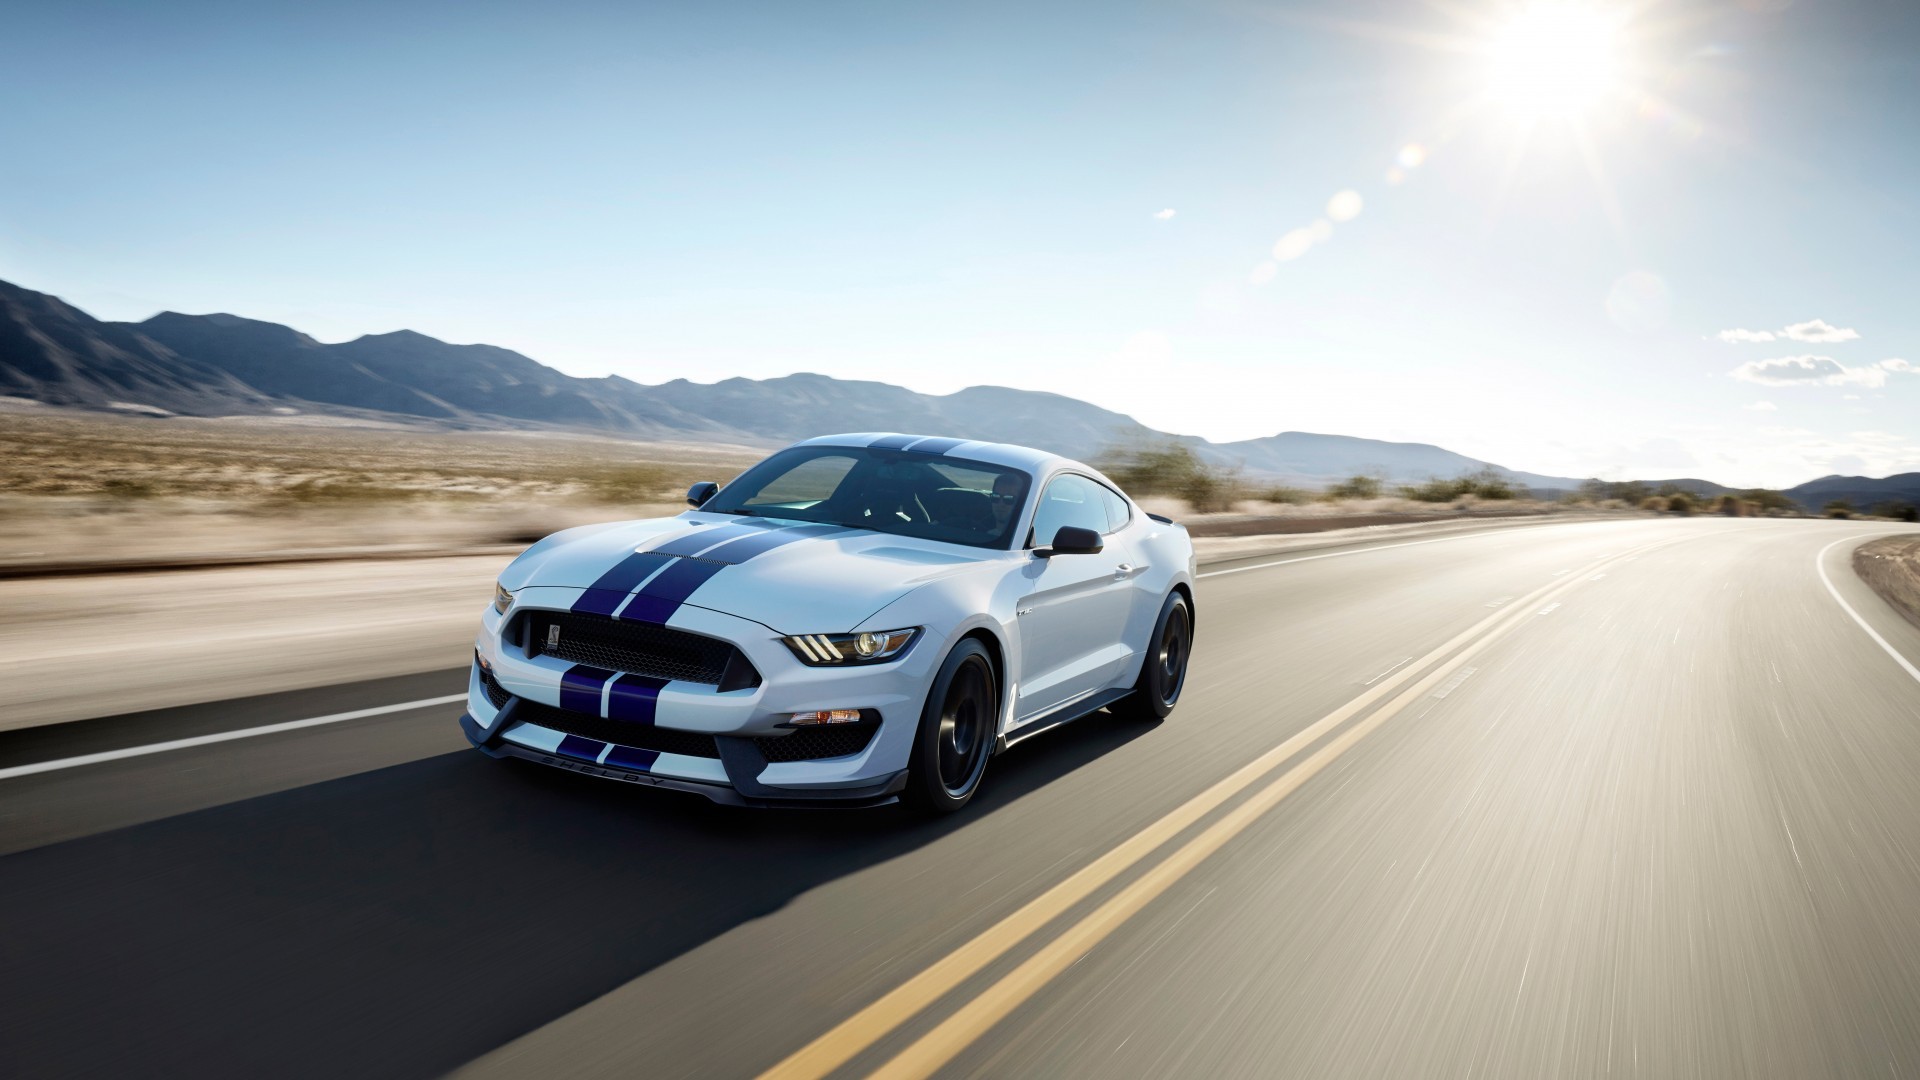 Car Ford Mustang Shelby Shelby GT350 Muscle Cars American Cars Coupe Road Racing Stripes 1920x1080